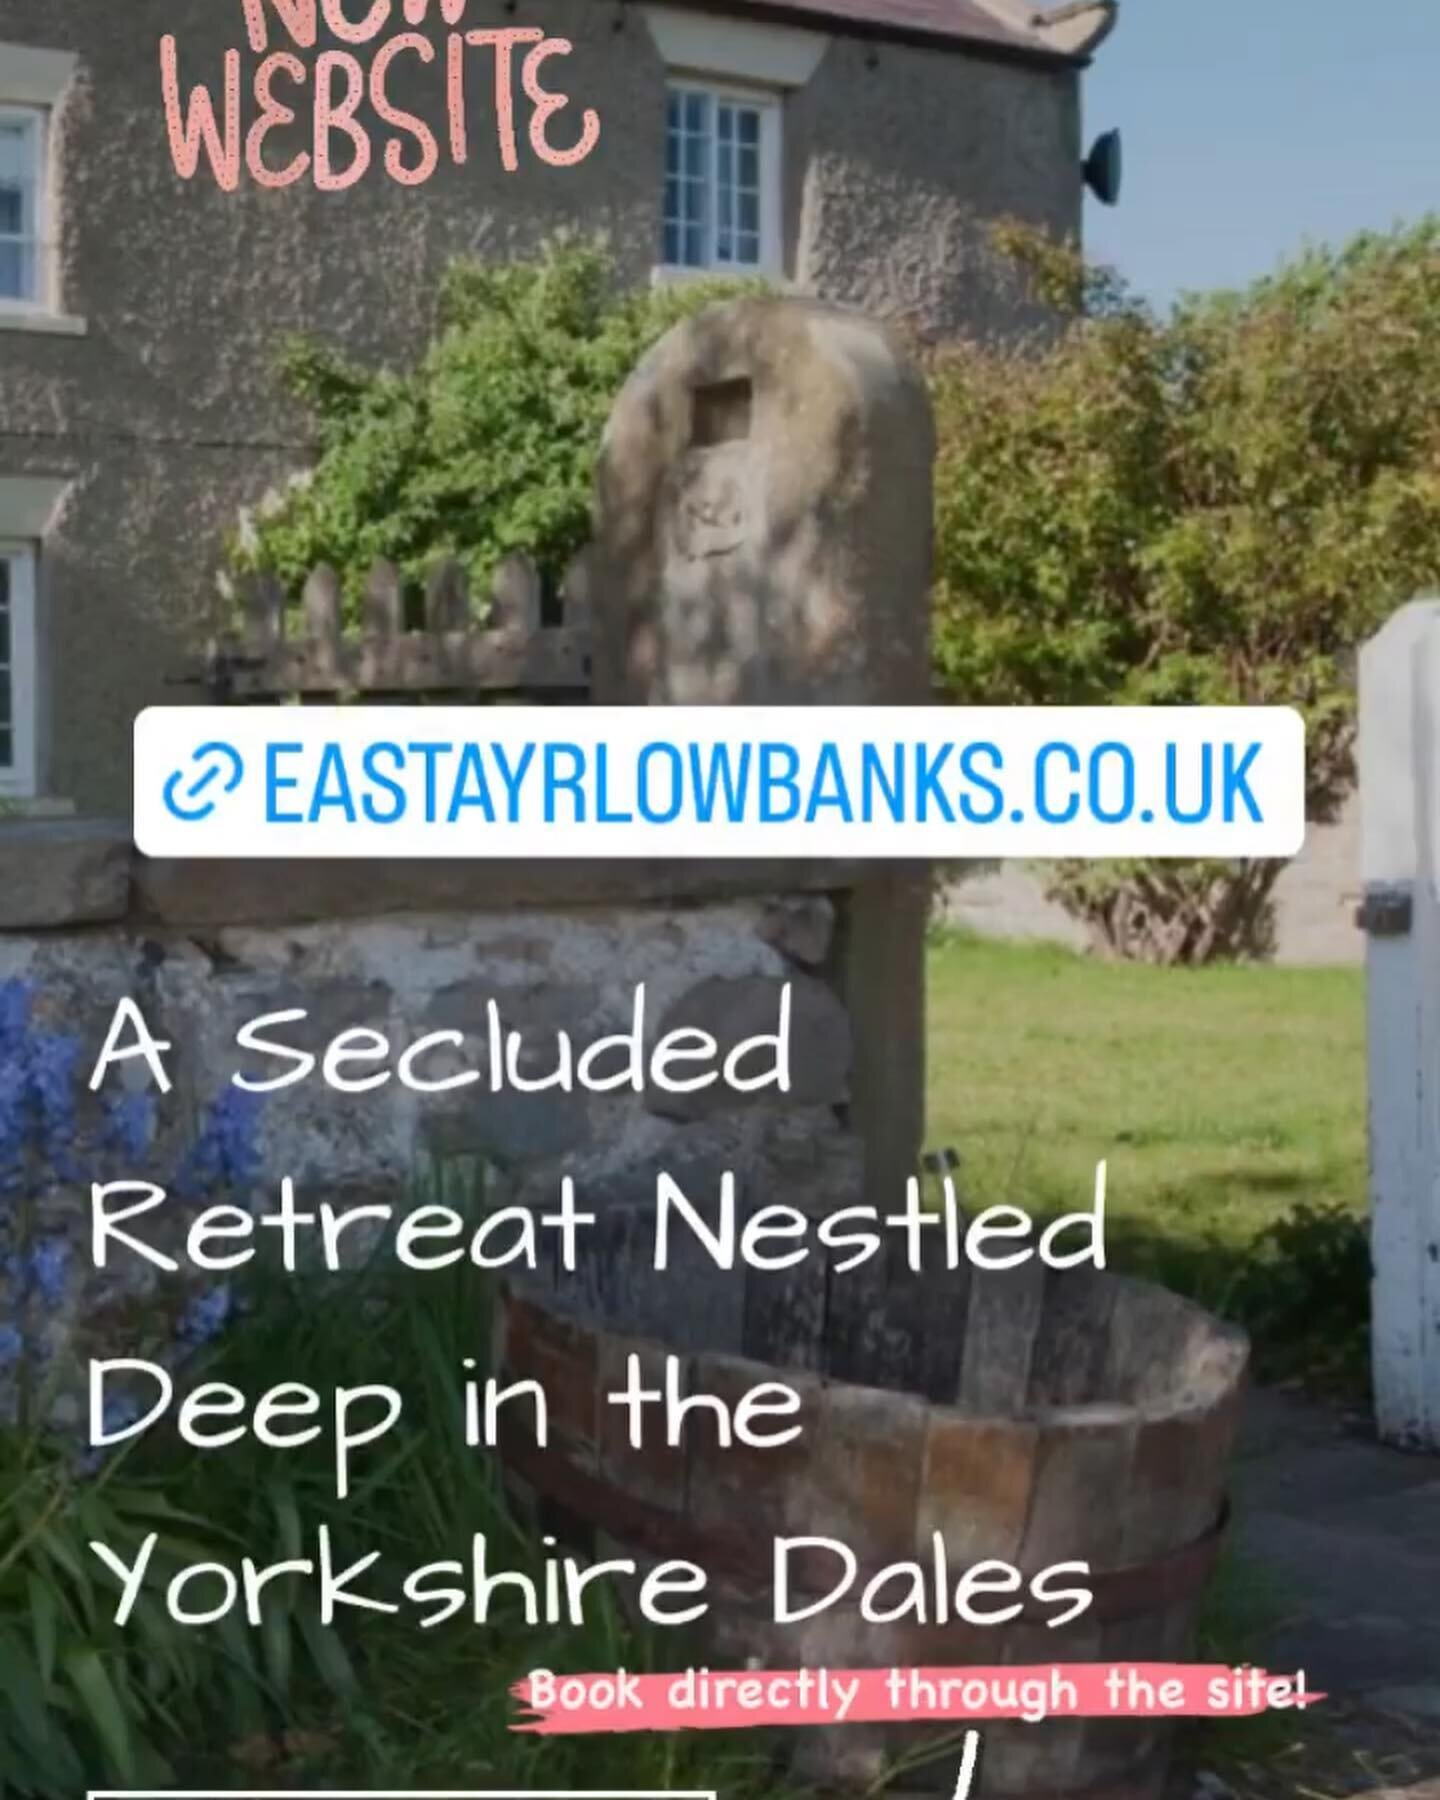 All-new website! www.eastayrlowbanks.co.uk now taking bookings directly through our site, with availability from September onwards! 🙌 #clicktobook #staycation #yorkshireholidaycottage #yorkshiredales #eastayrlowbanks🌳